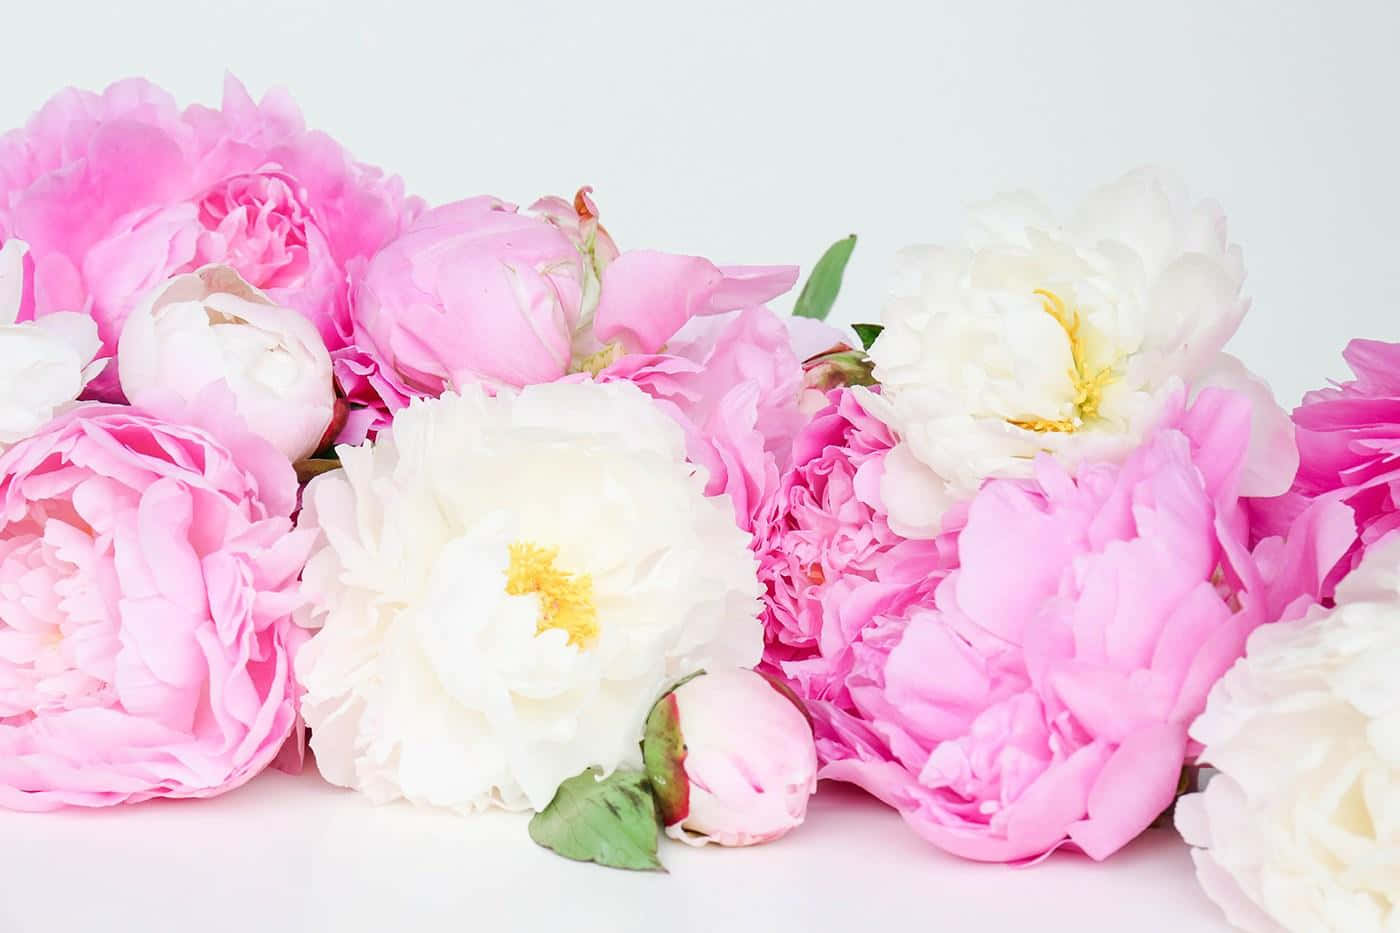 A beautiful bouquet of delicate peonies